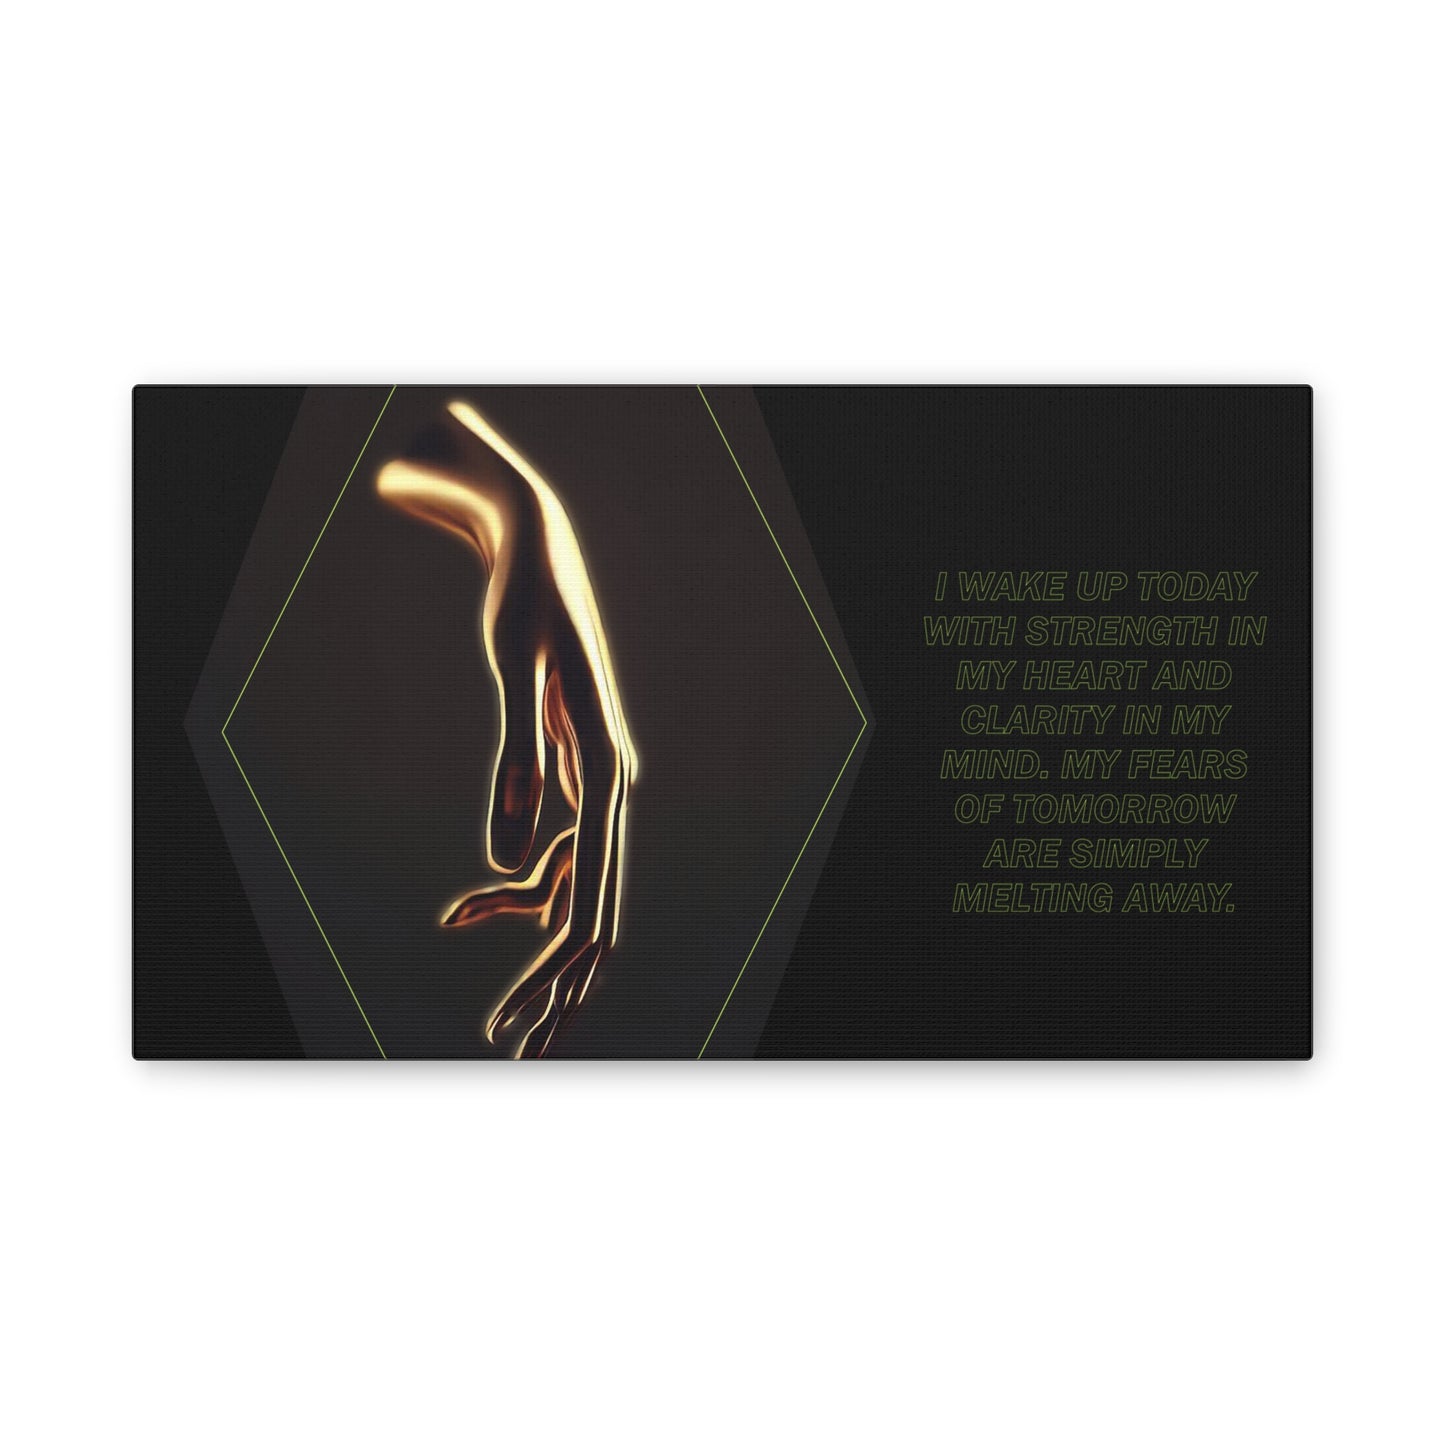 Strength and Serenity - Affirmation Wall Art